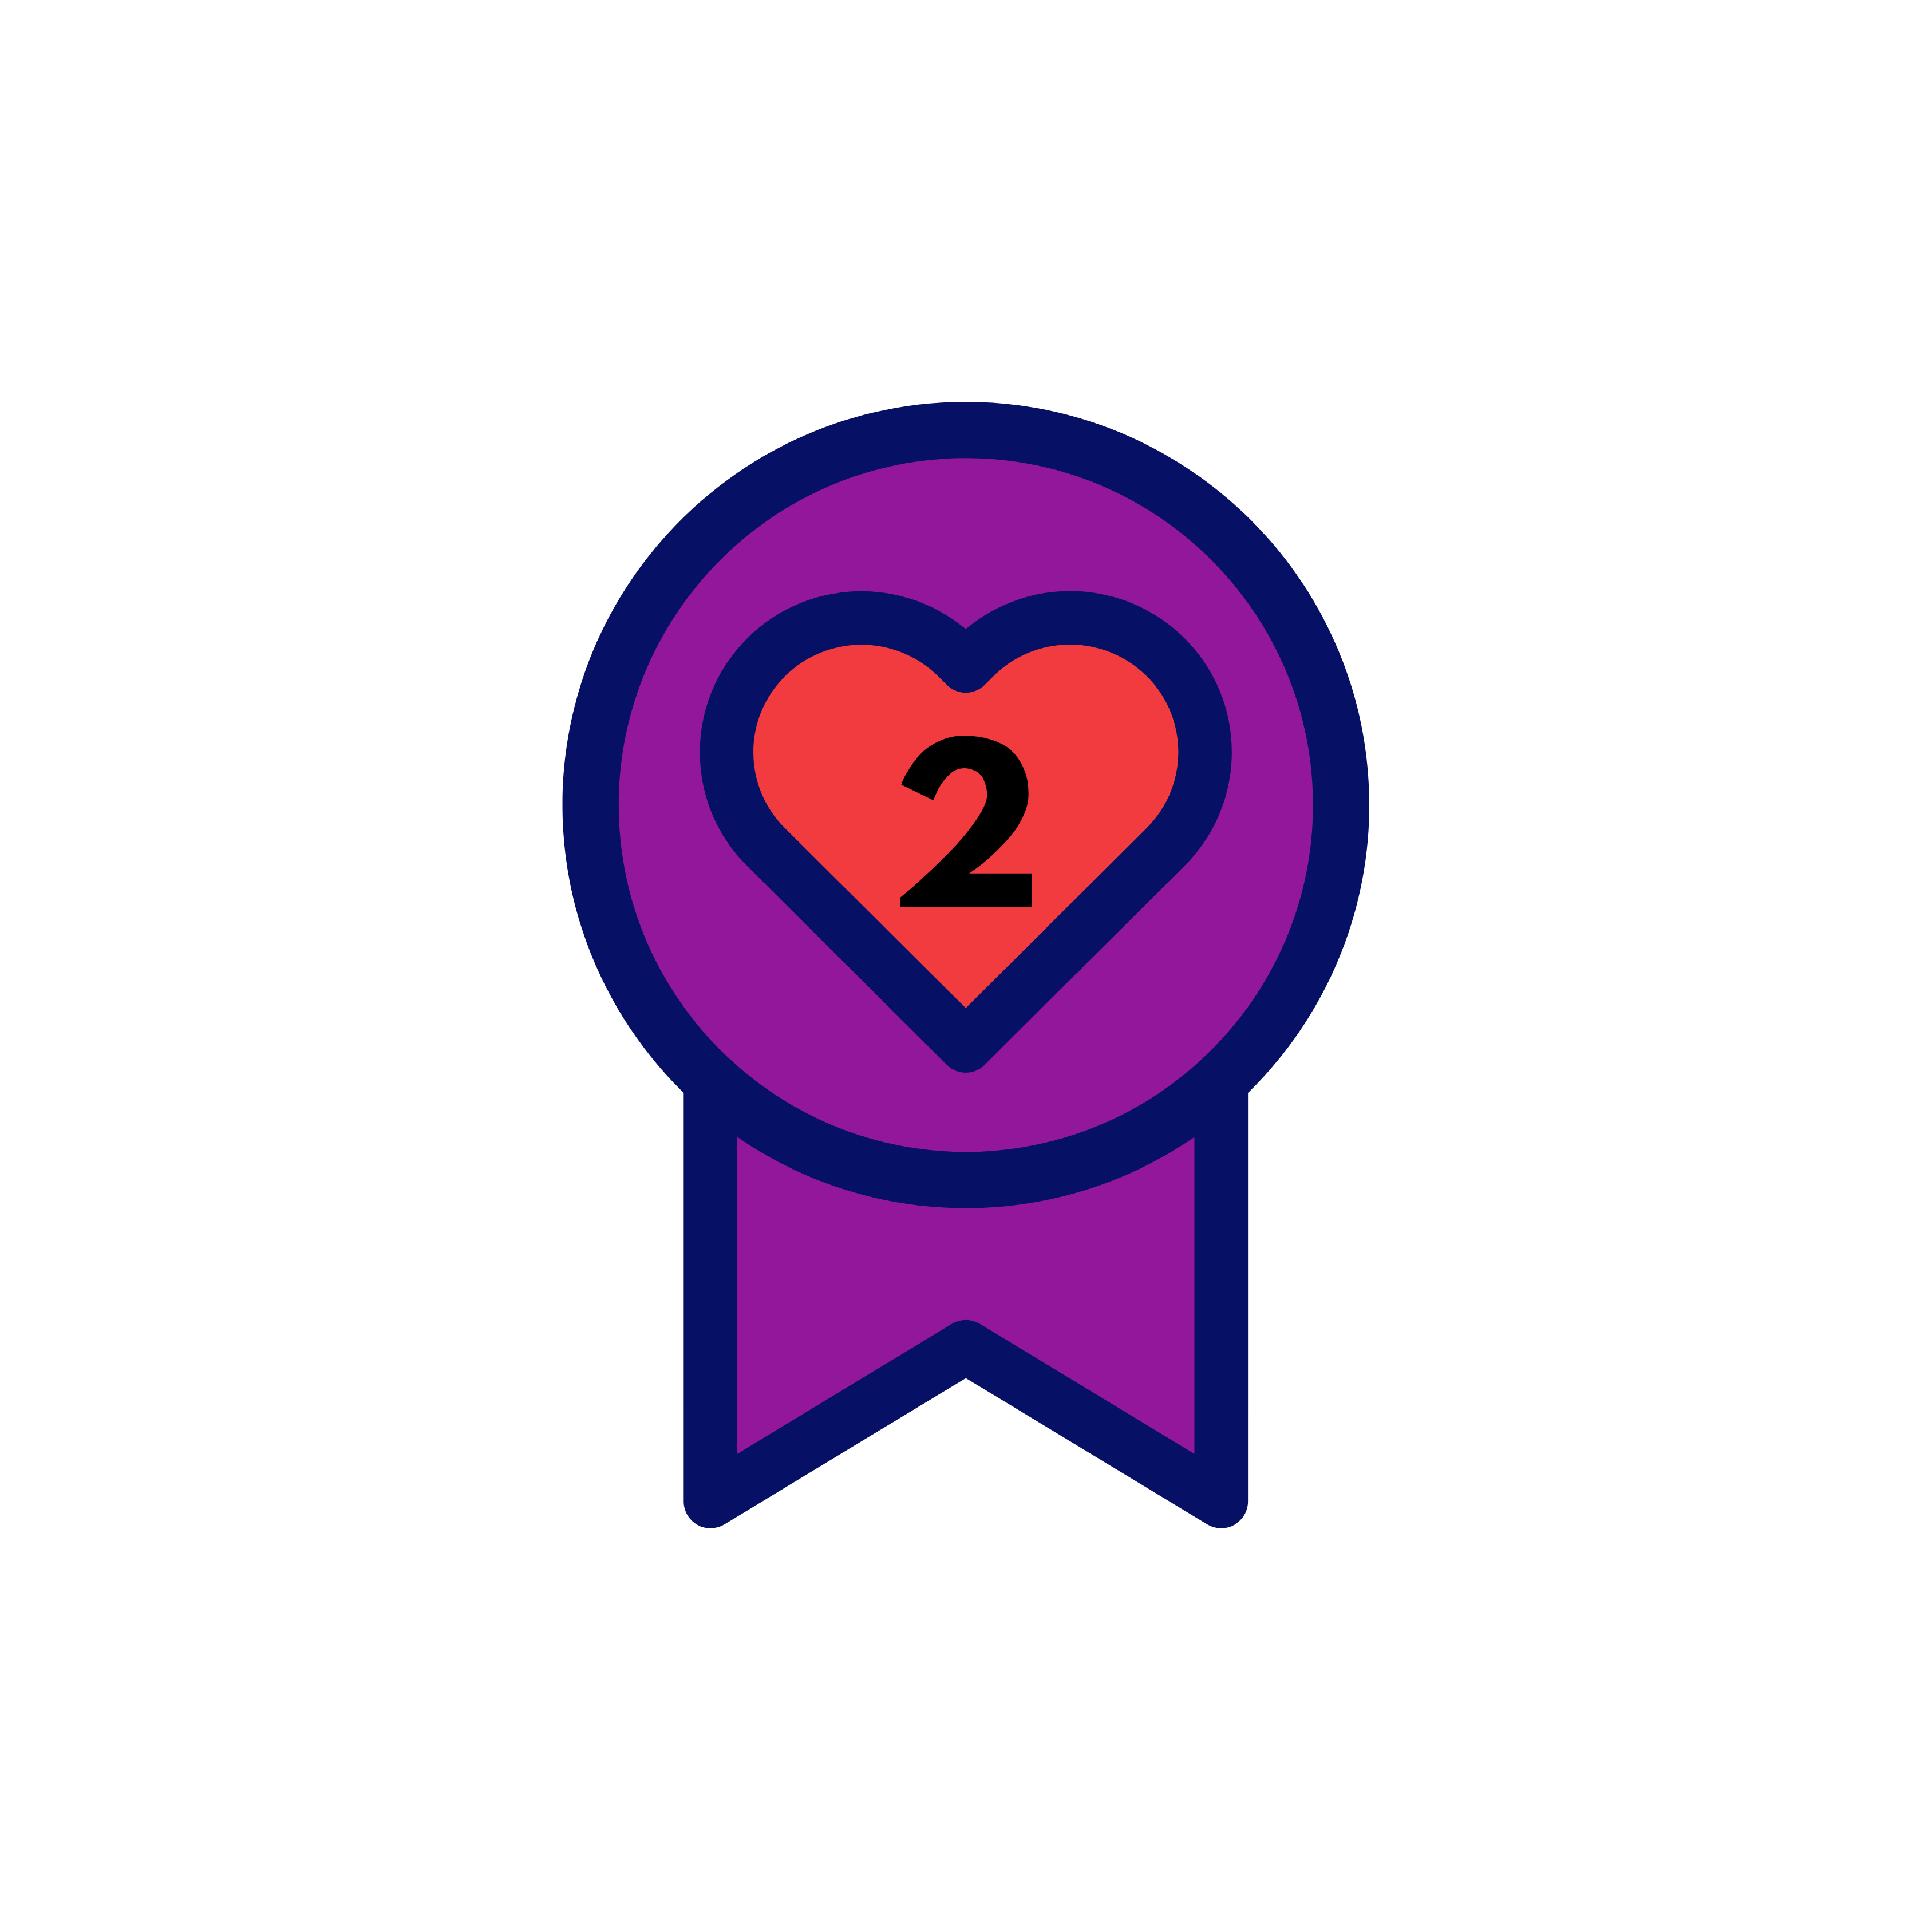 ANNIVERSARY BADGES - Level 2
Gain "Points" for "Anniversary" 2 times